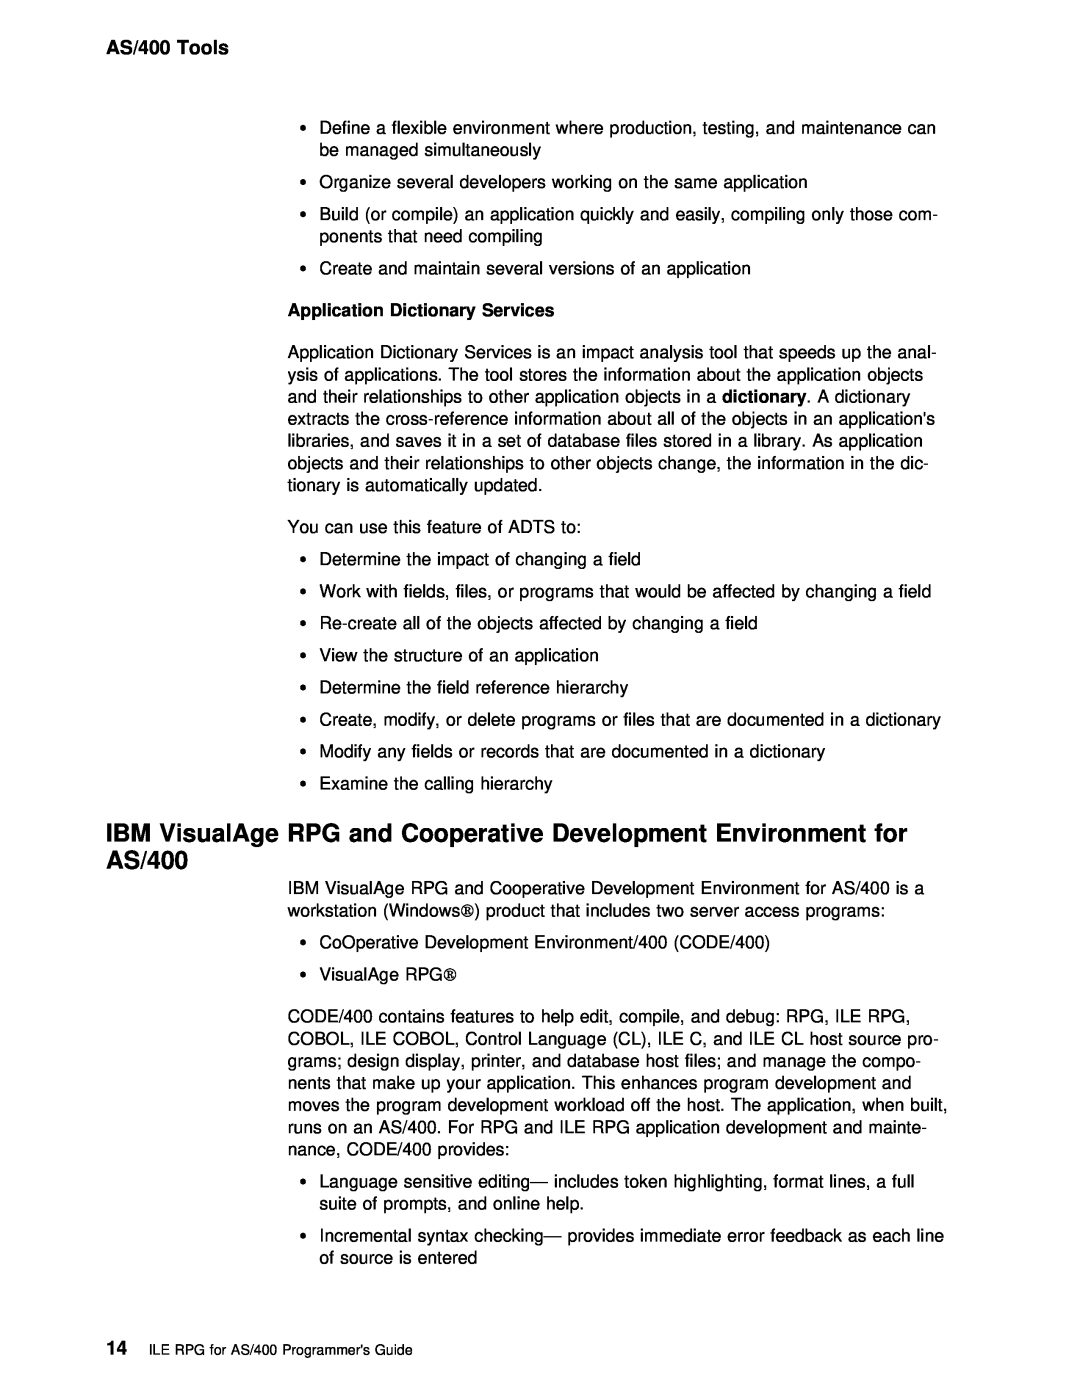 IBM manual IBM VisualAge RPG and Cooperative Development Environment for AS/400, AS/400 Tools 